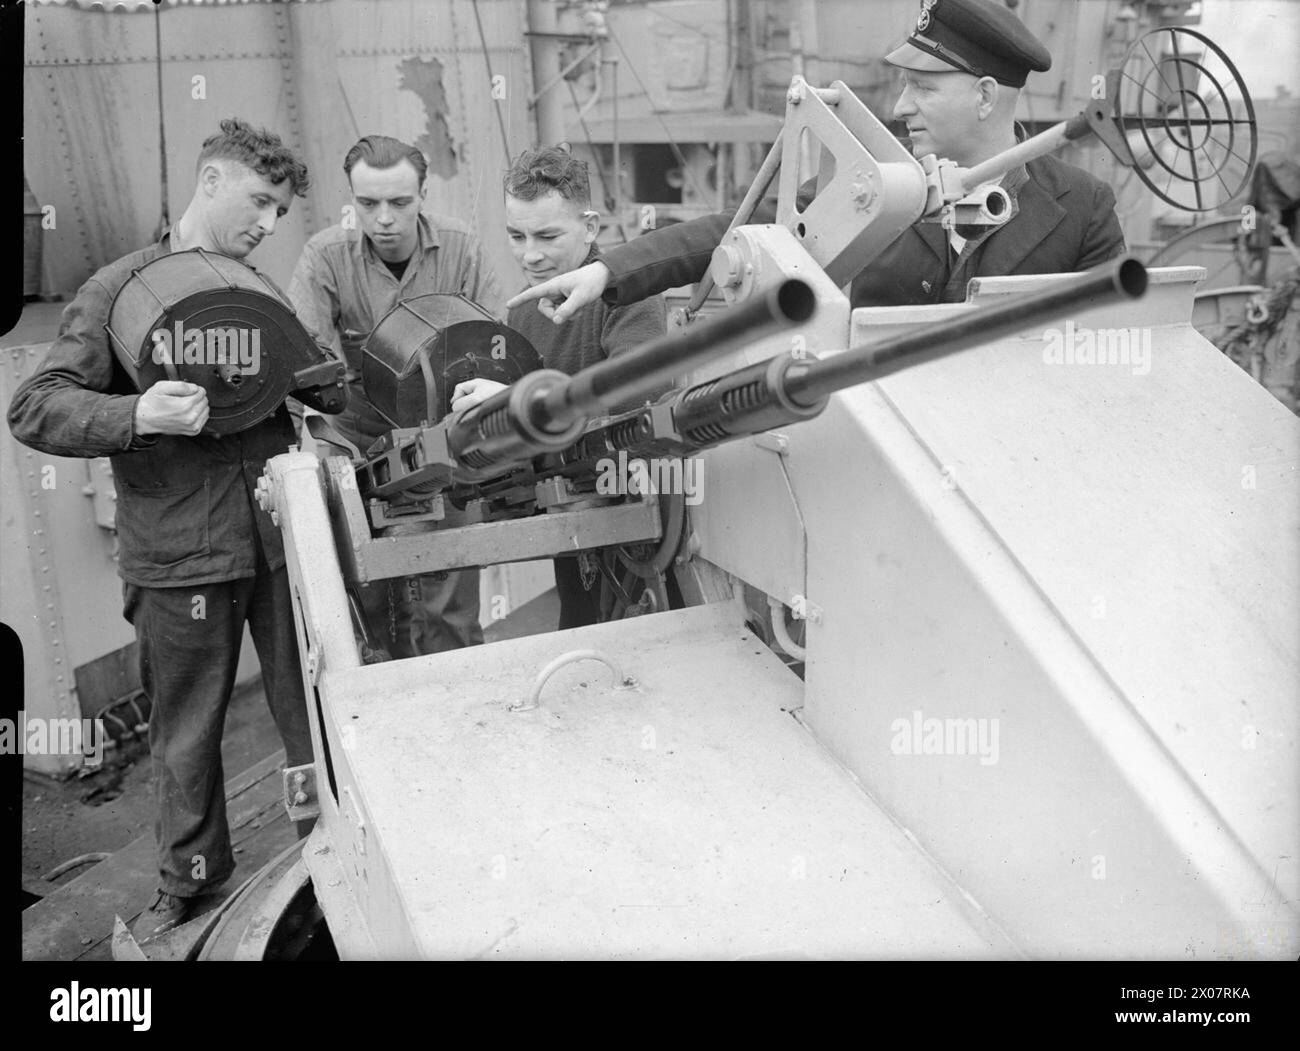 THE ROYAL NAVY DURING THE SECOND WORLD WAR - 20 mm Oerlikon gunners of HMS STARLING on arrival at Liverpool. Left to right: Able Seaman Edward O'Malley, of Stockport, Cheshire (about to fix a fresh magazine of ammunition to the gun); Able Seaman John Smith of Islington, London; Able Seaman Edward Webster, of Dundee; and Petty Officer William G Barnshaw, of Callington, Cornwall  Royal Navy, HMS Starling, Sloop, (1942) Stock Photo